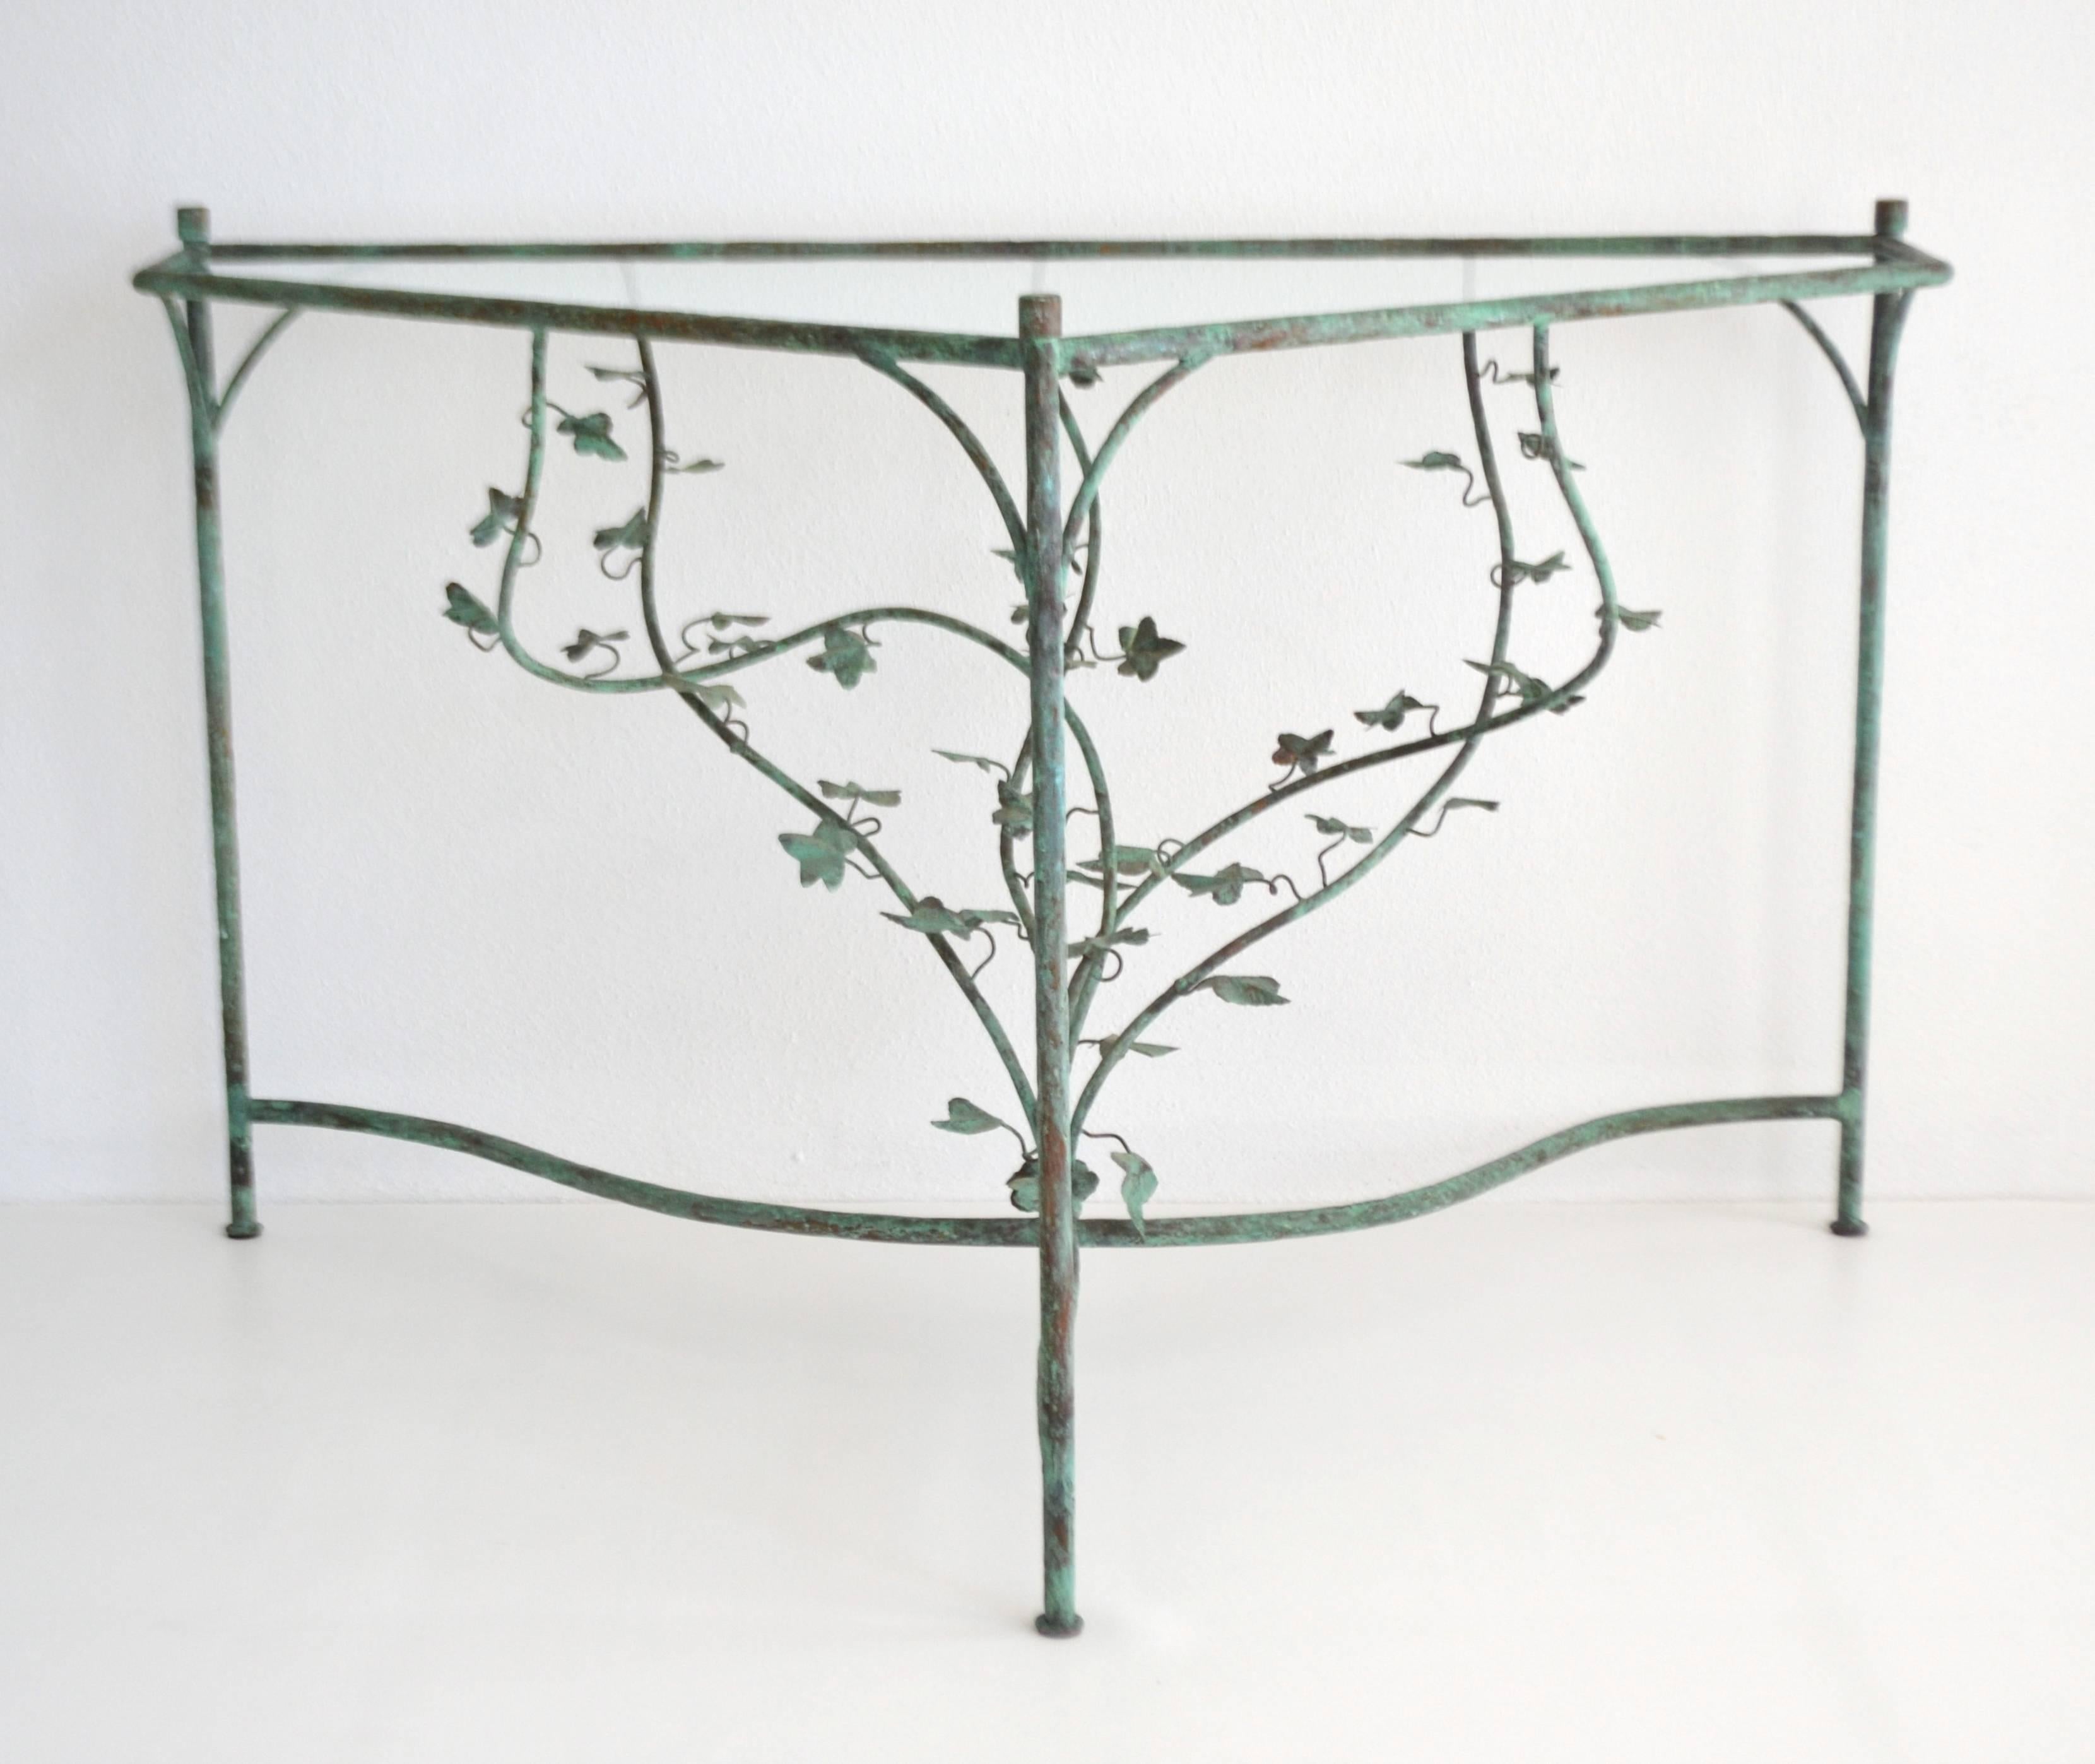 Glamorous Hollywood Regency style handwrought triangular form console table or center hall table, circa 1950s. This striking hammered copper corner table with aged verdigris oxidized patina is designed with exquisite scrolling vine form details and